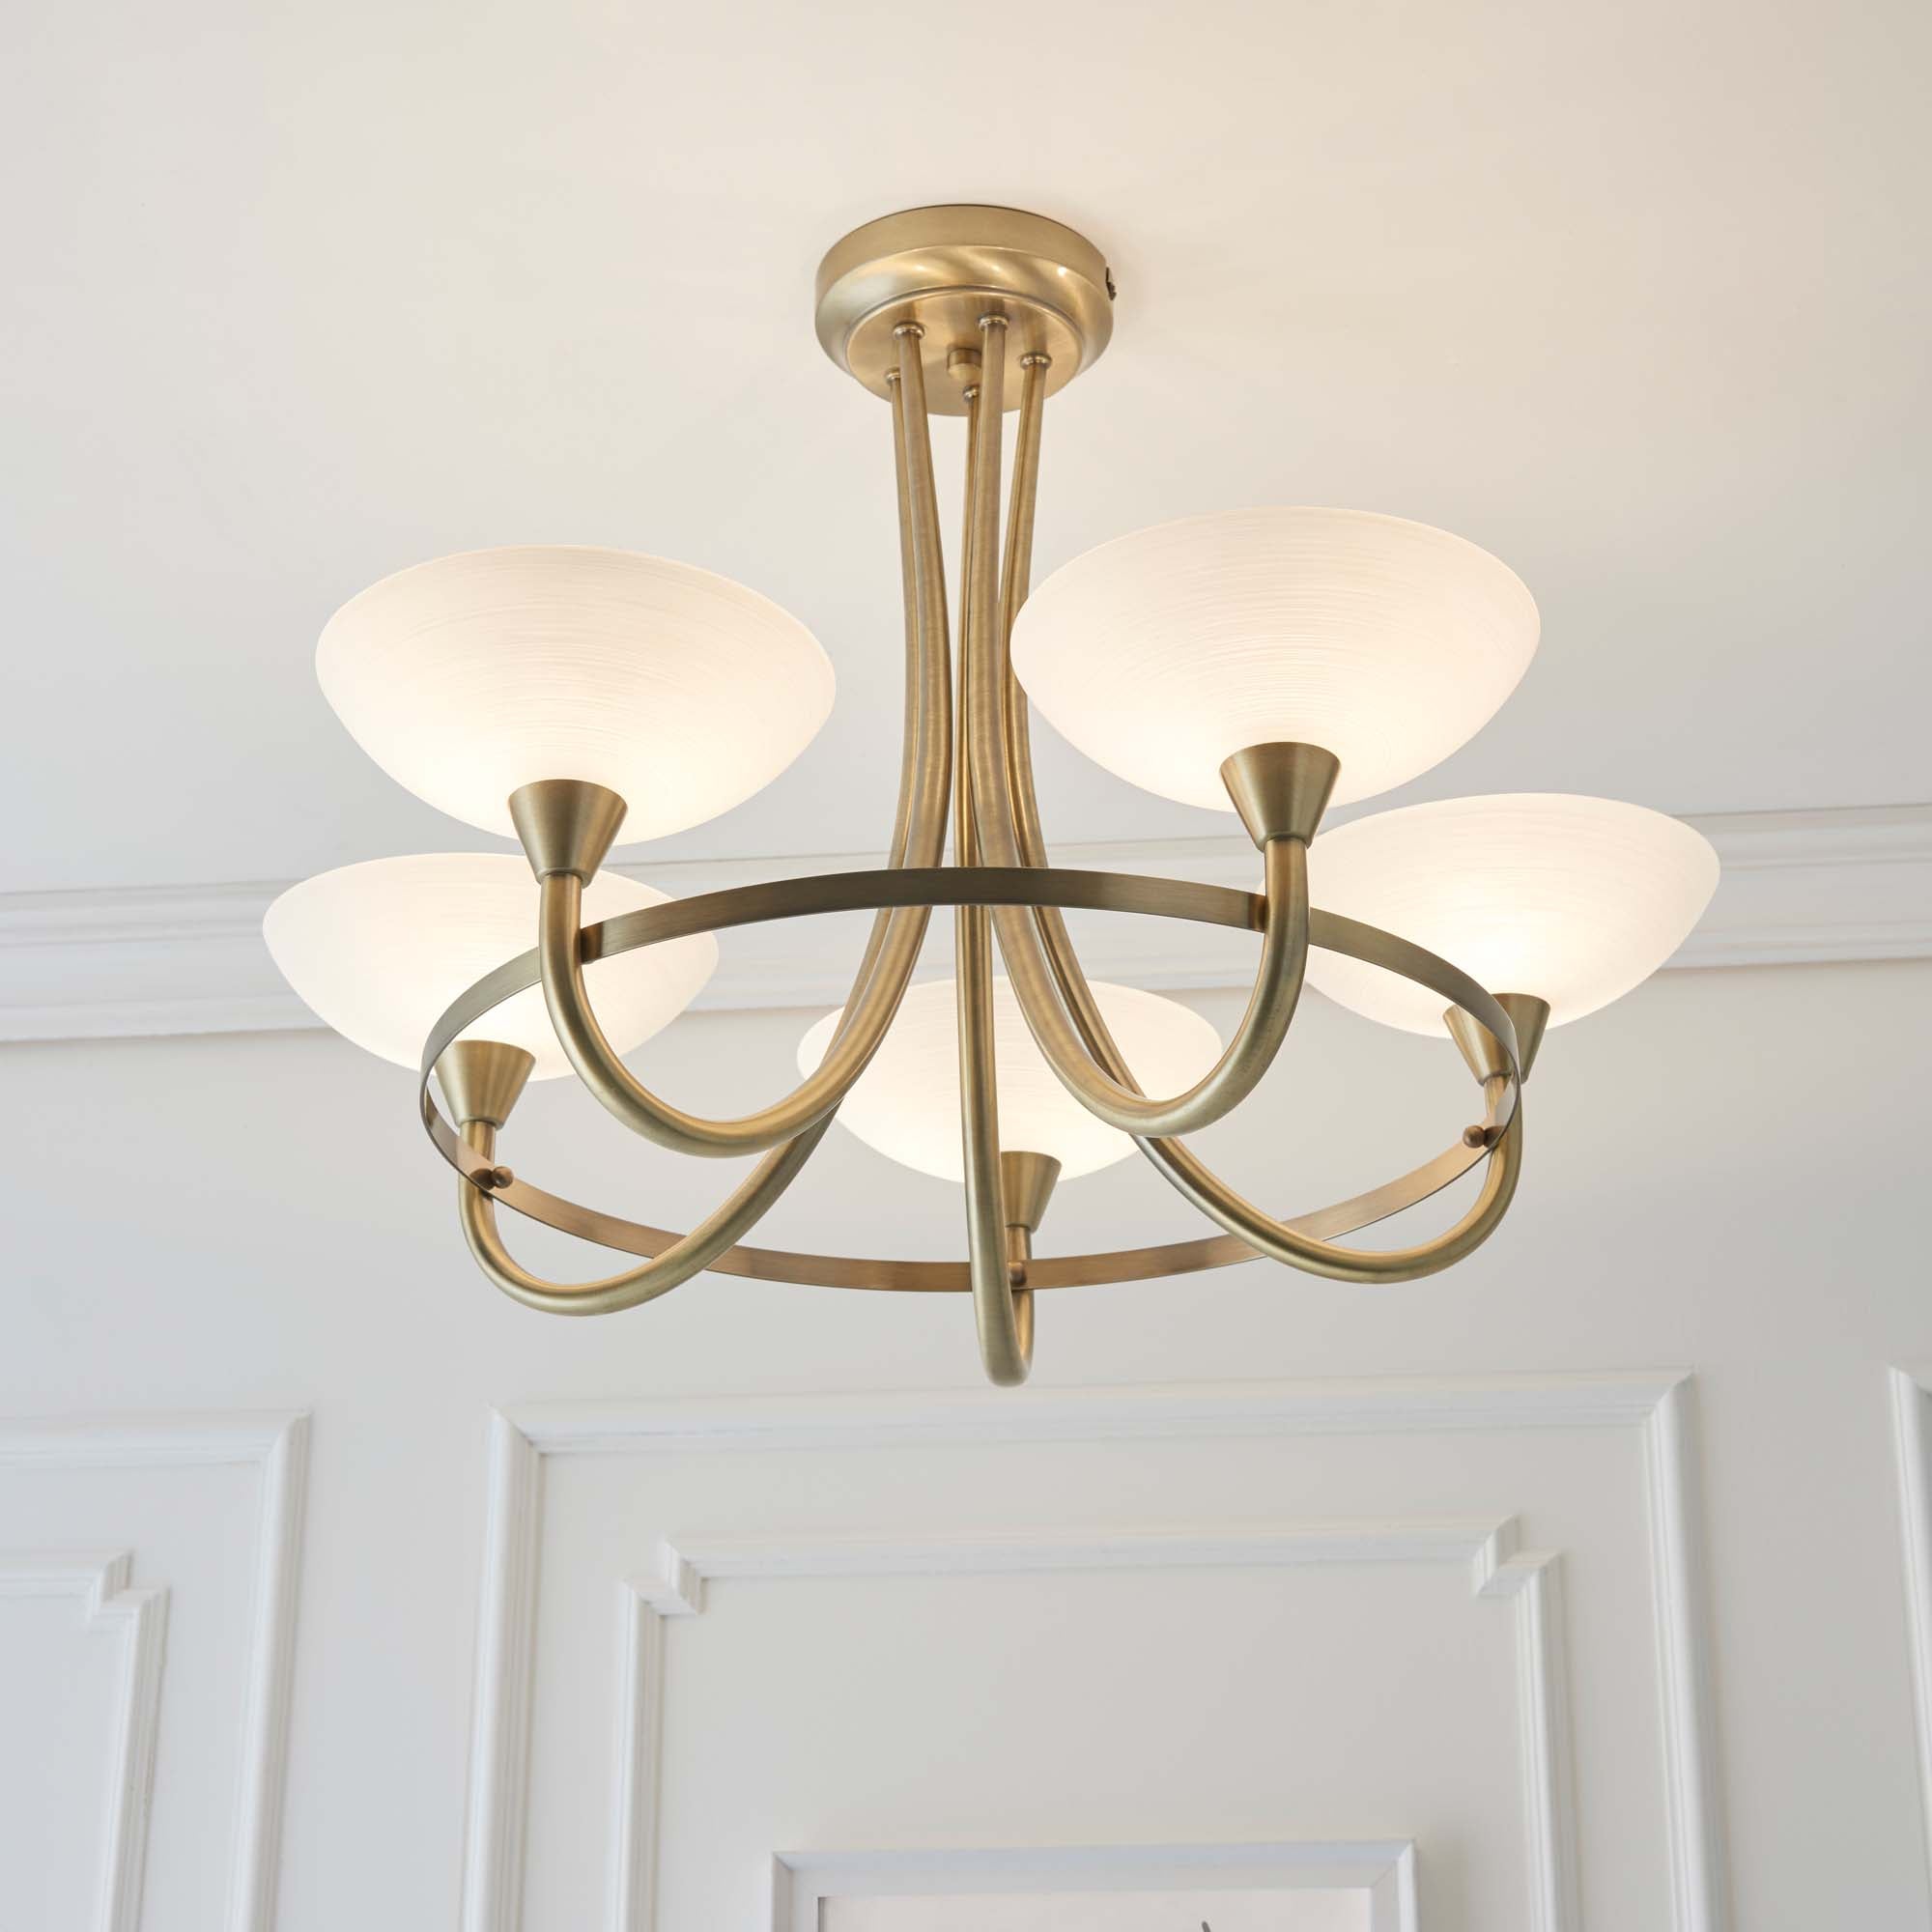 Vogue Cagney 5 Light Semi Flush Ceiling Fitting Brass Brown